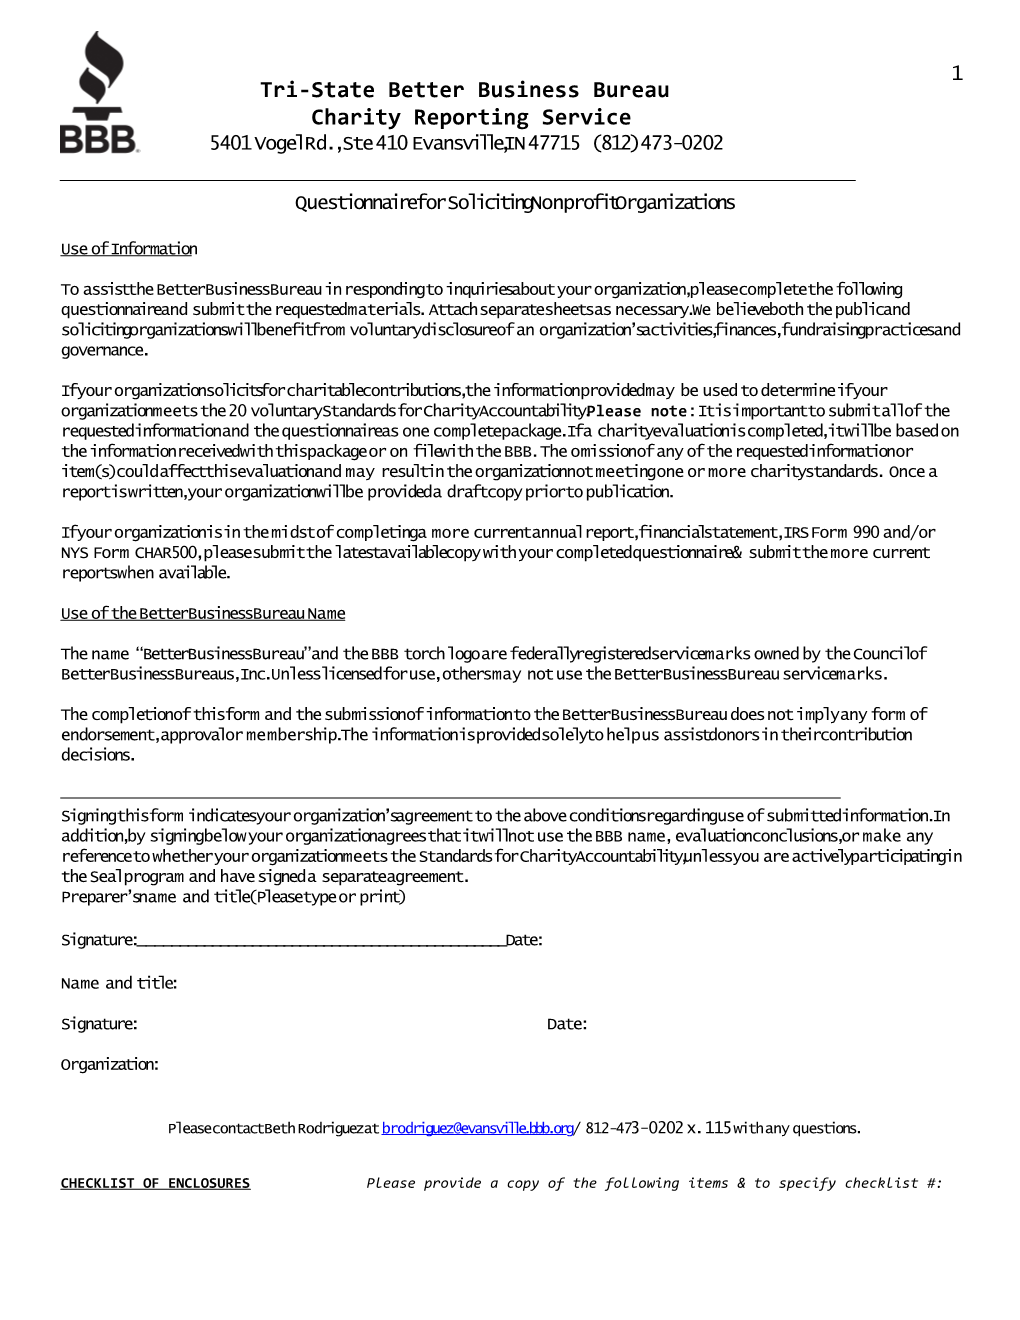 Questionnaire for Soliciting Nonprofit Organizations